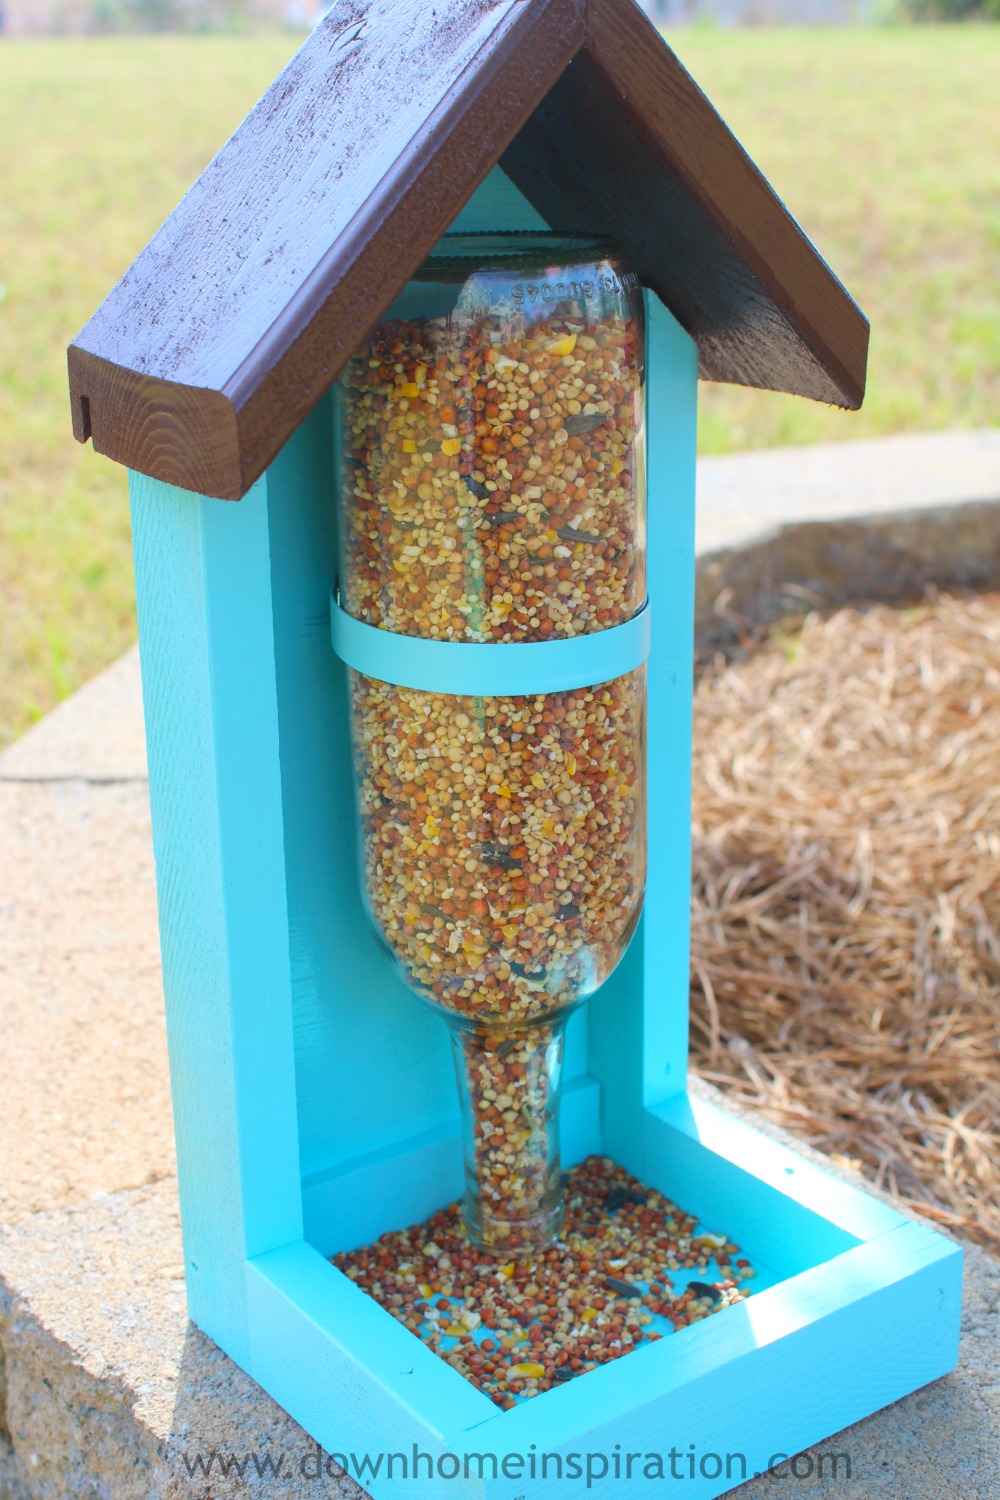 How to Make a Wine Bottle Bird Feeder Down Home Inspiration